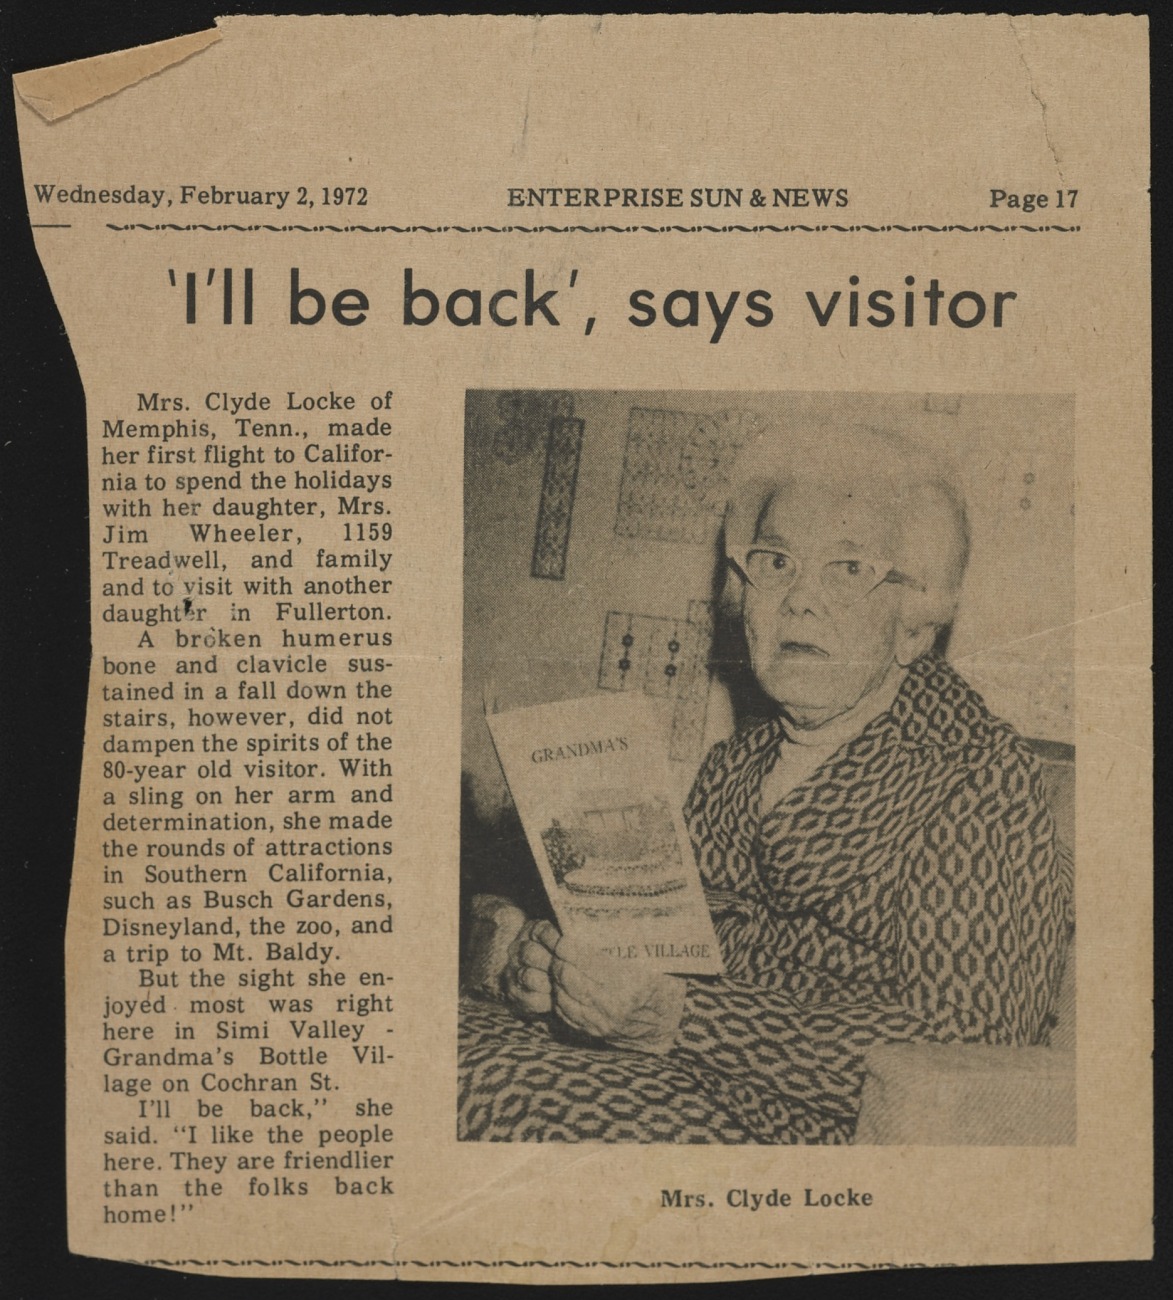 Newspaper clipping dated Wednesday, February 2, 1972 from the "Enterprise Sun & News," p. 17, showing a photograph of an elderly woman holding a brochure reading "Grandma's Bottle Village." The headline reads "'I'll be back', says visitor"